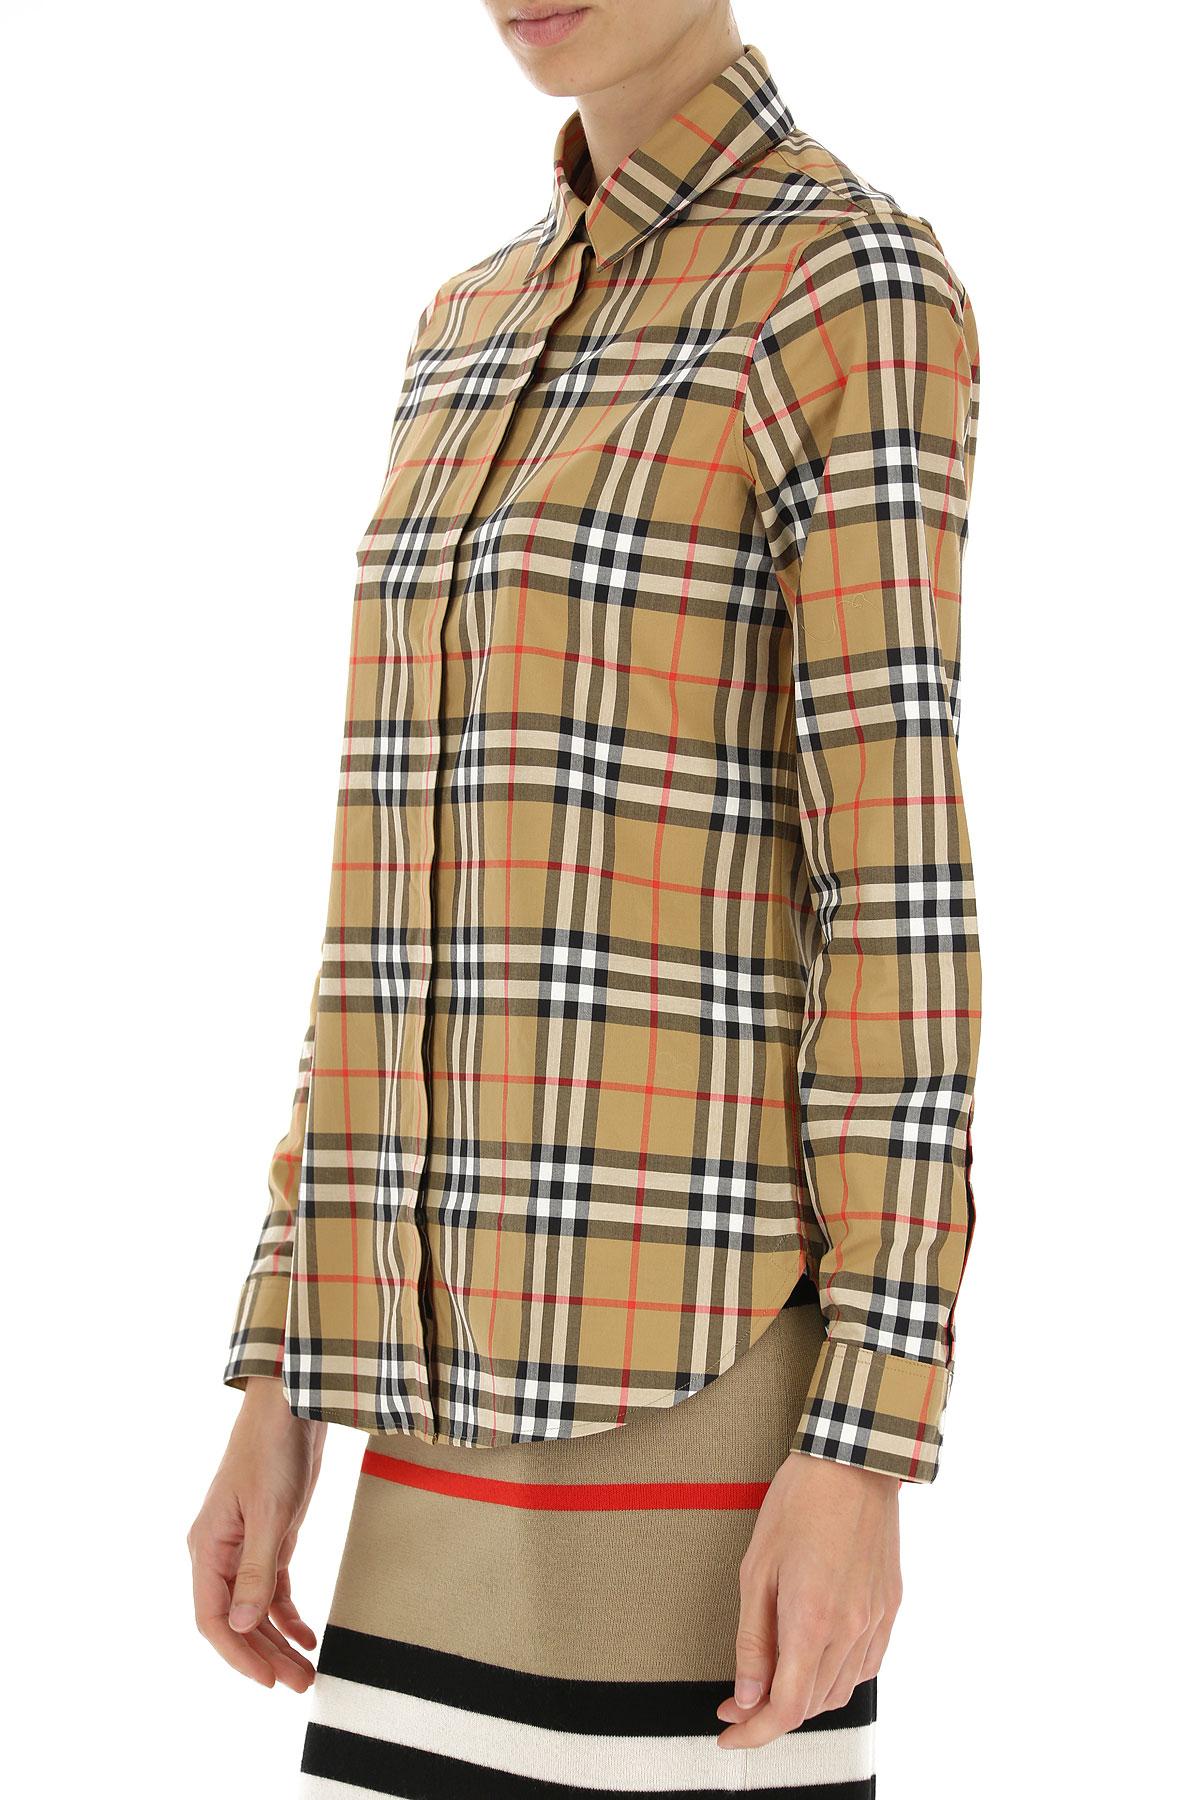 Burberry Redwing Long Shirt In Check Cotton in Beige (Natural) - Lyst